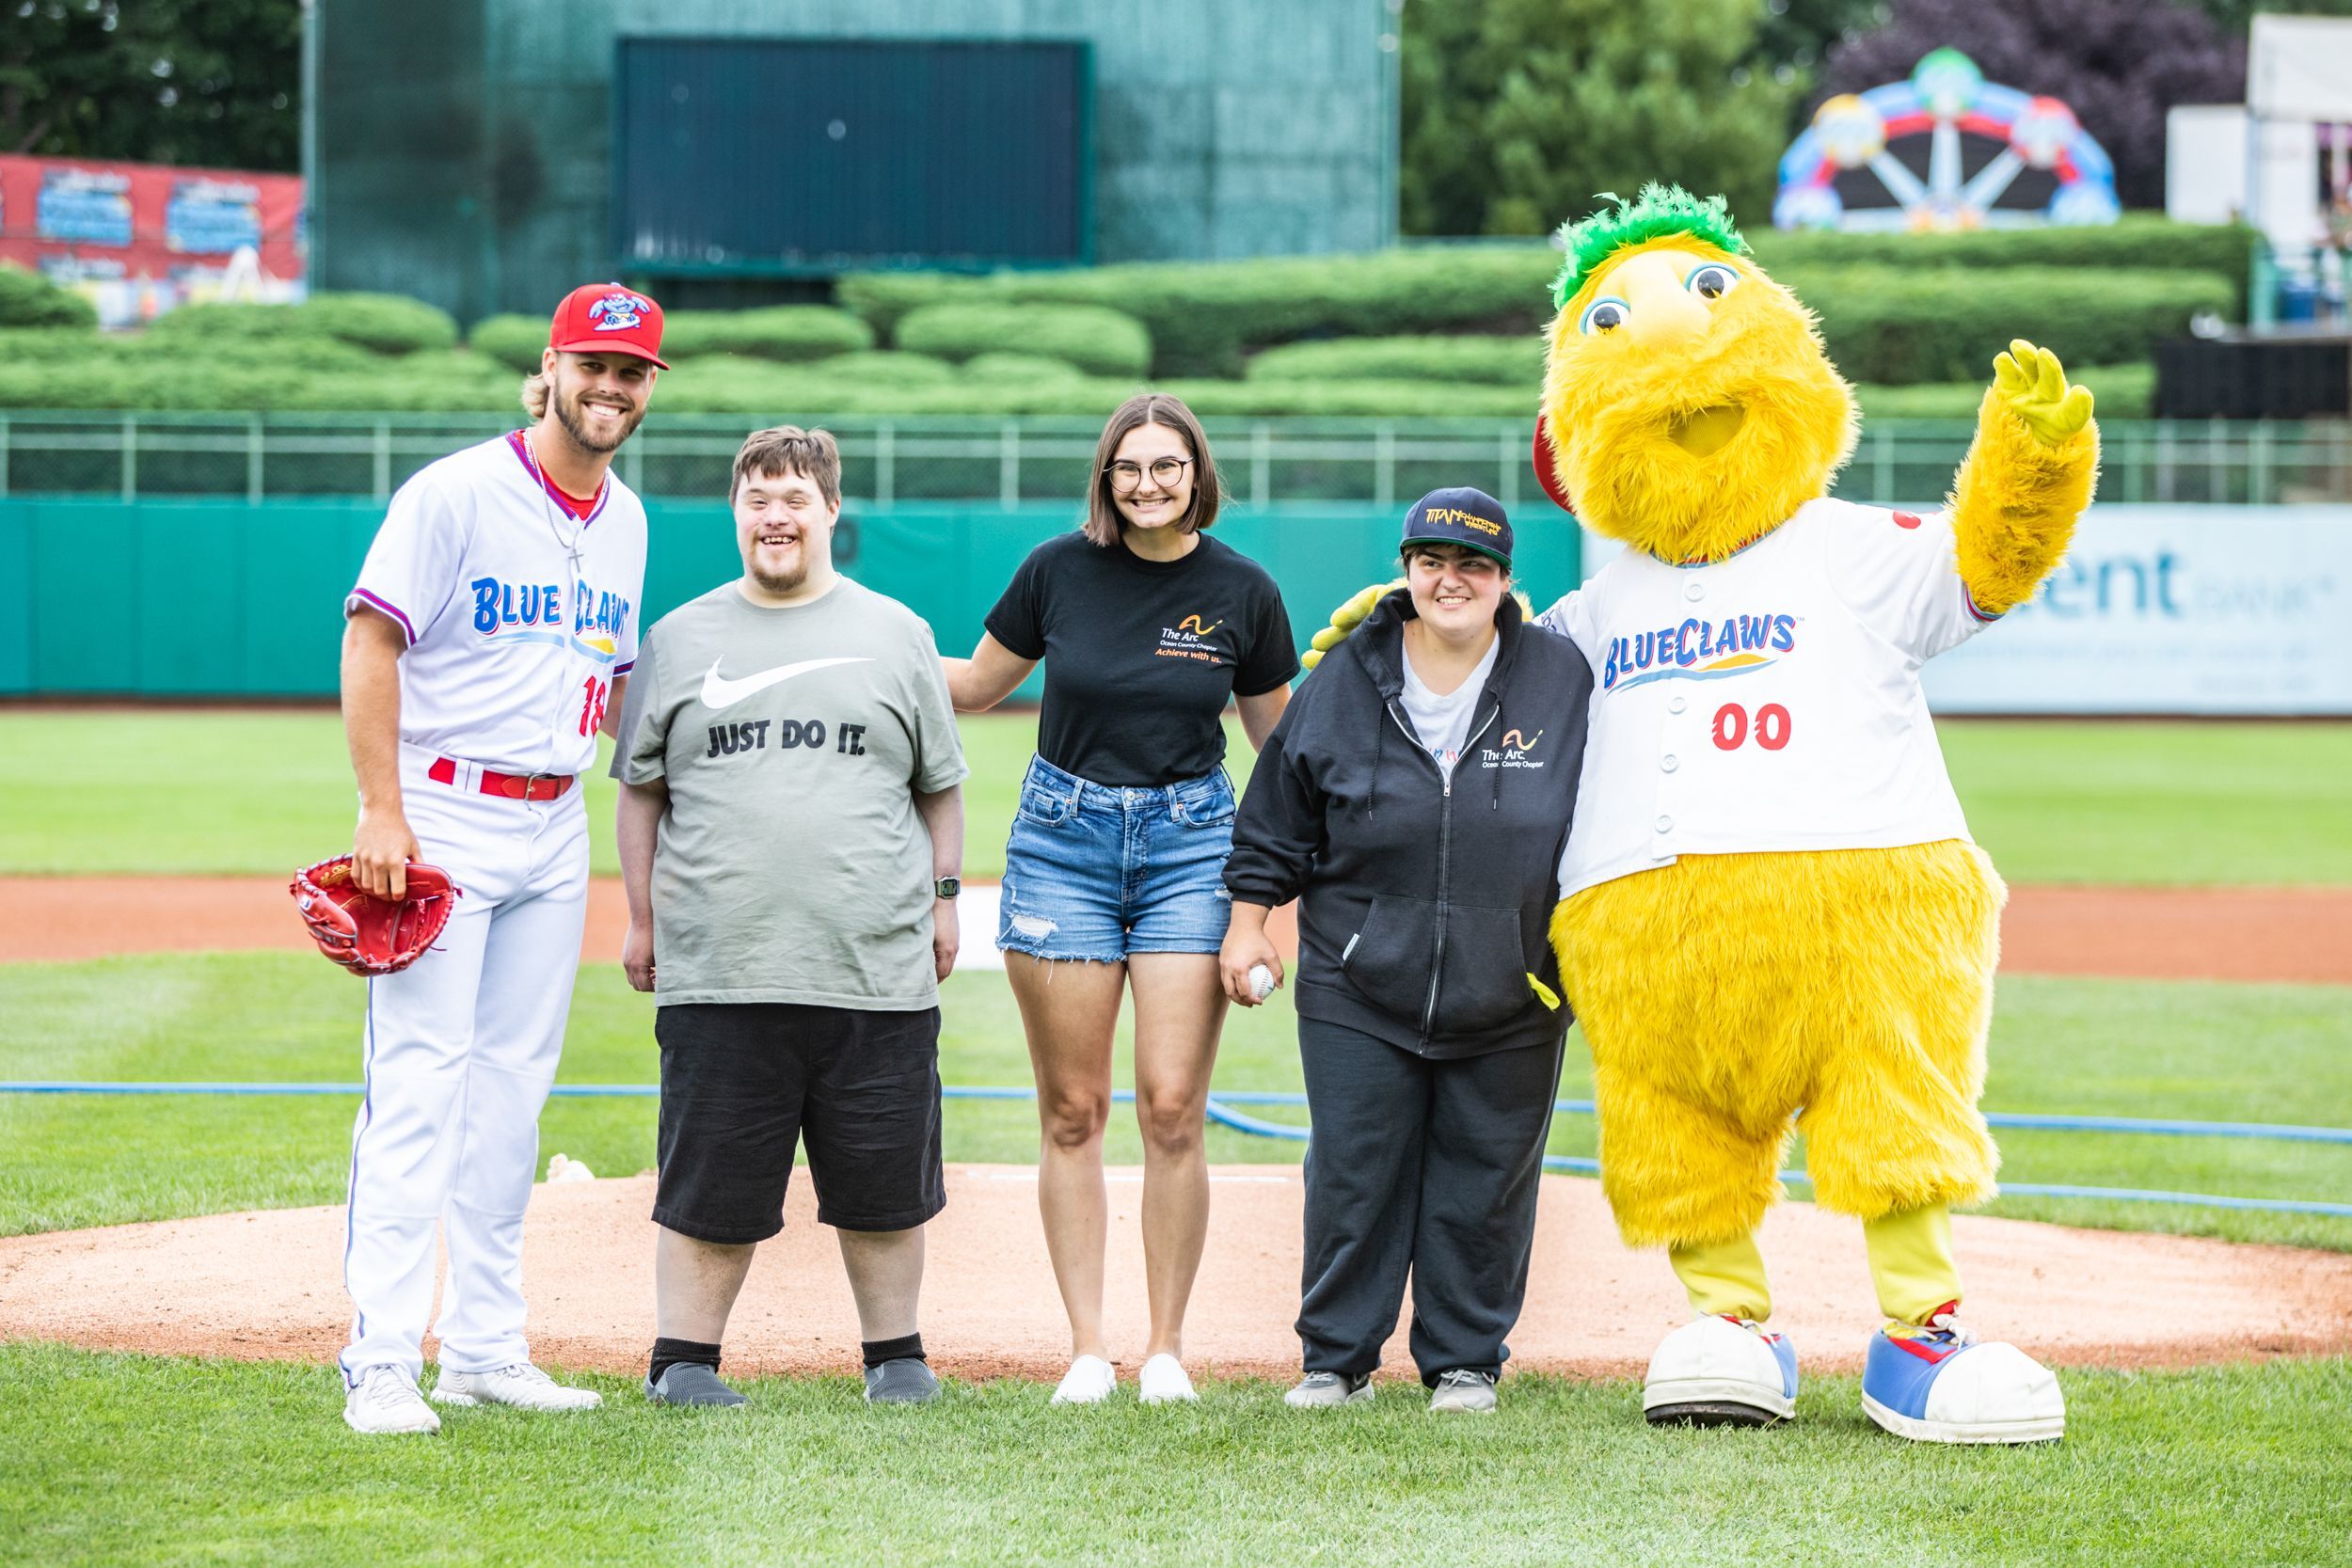 Photo of 2 men, 2 women and Buster the mascot on a baseball field